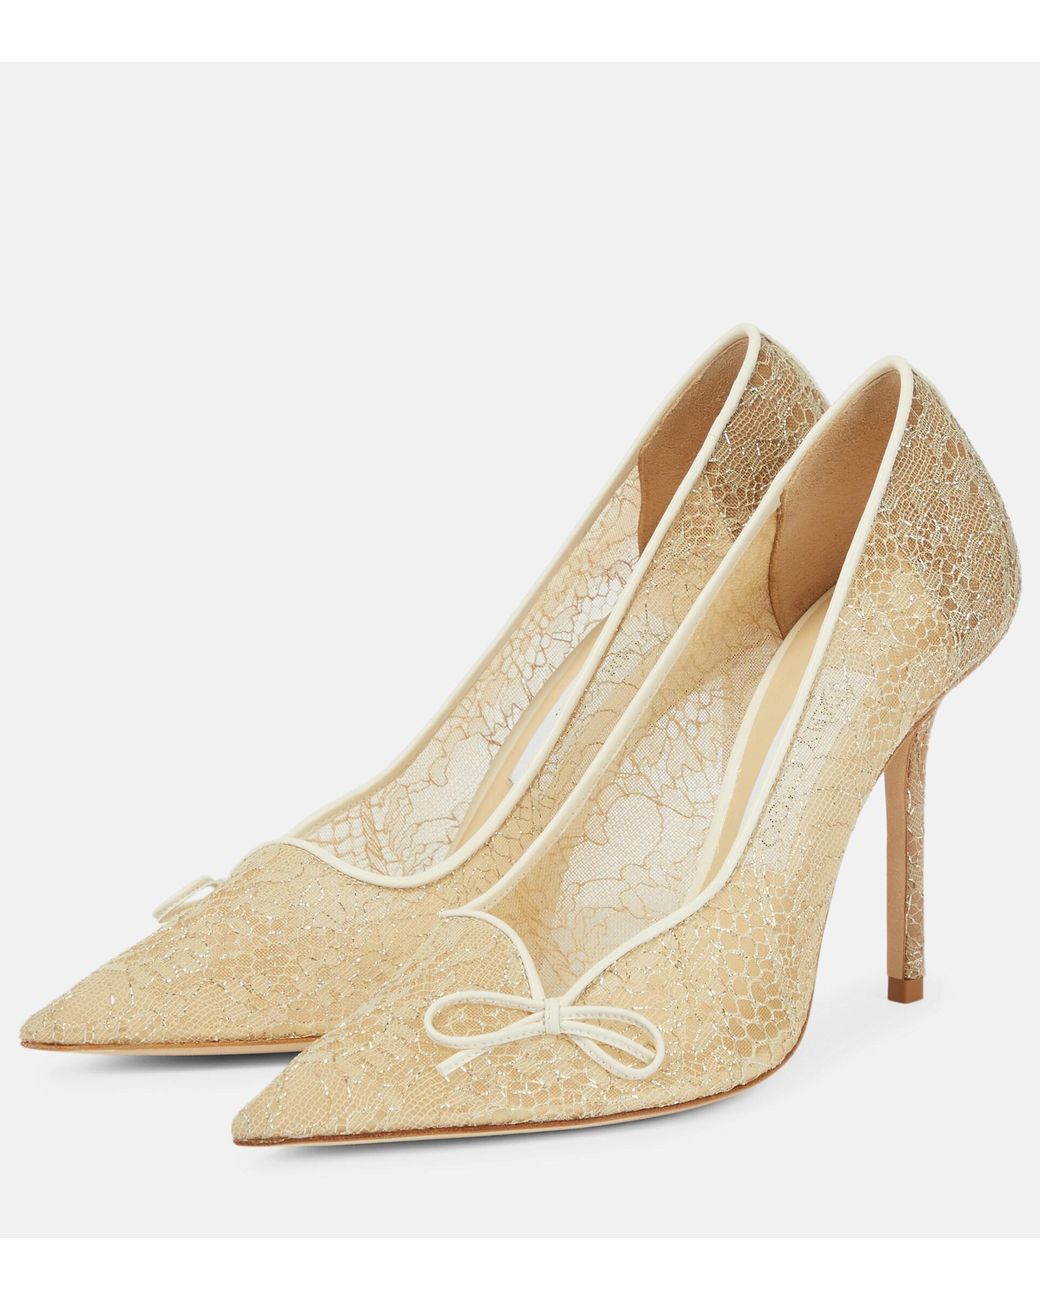 Jimmy Choo Cibelle 100 Lace Pumps in Natural | Lyst